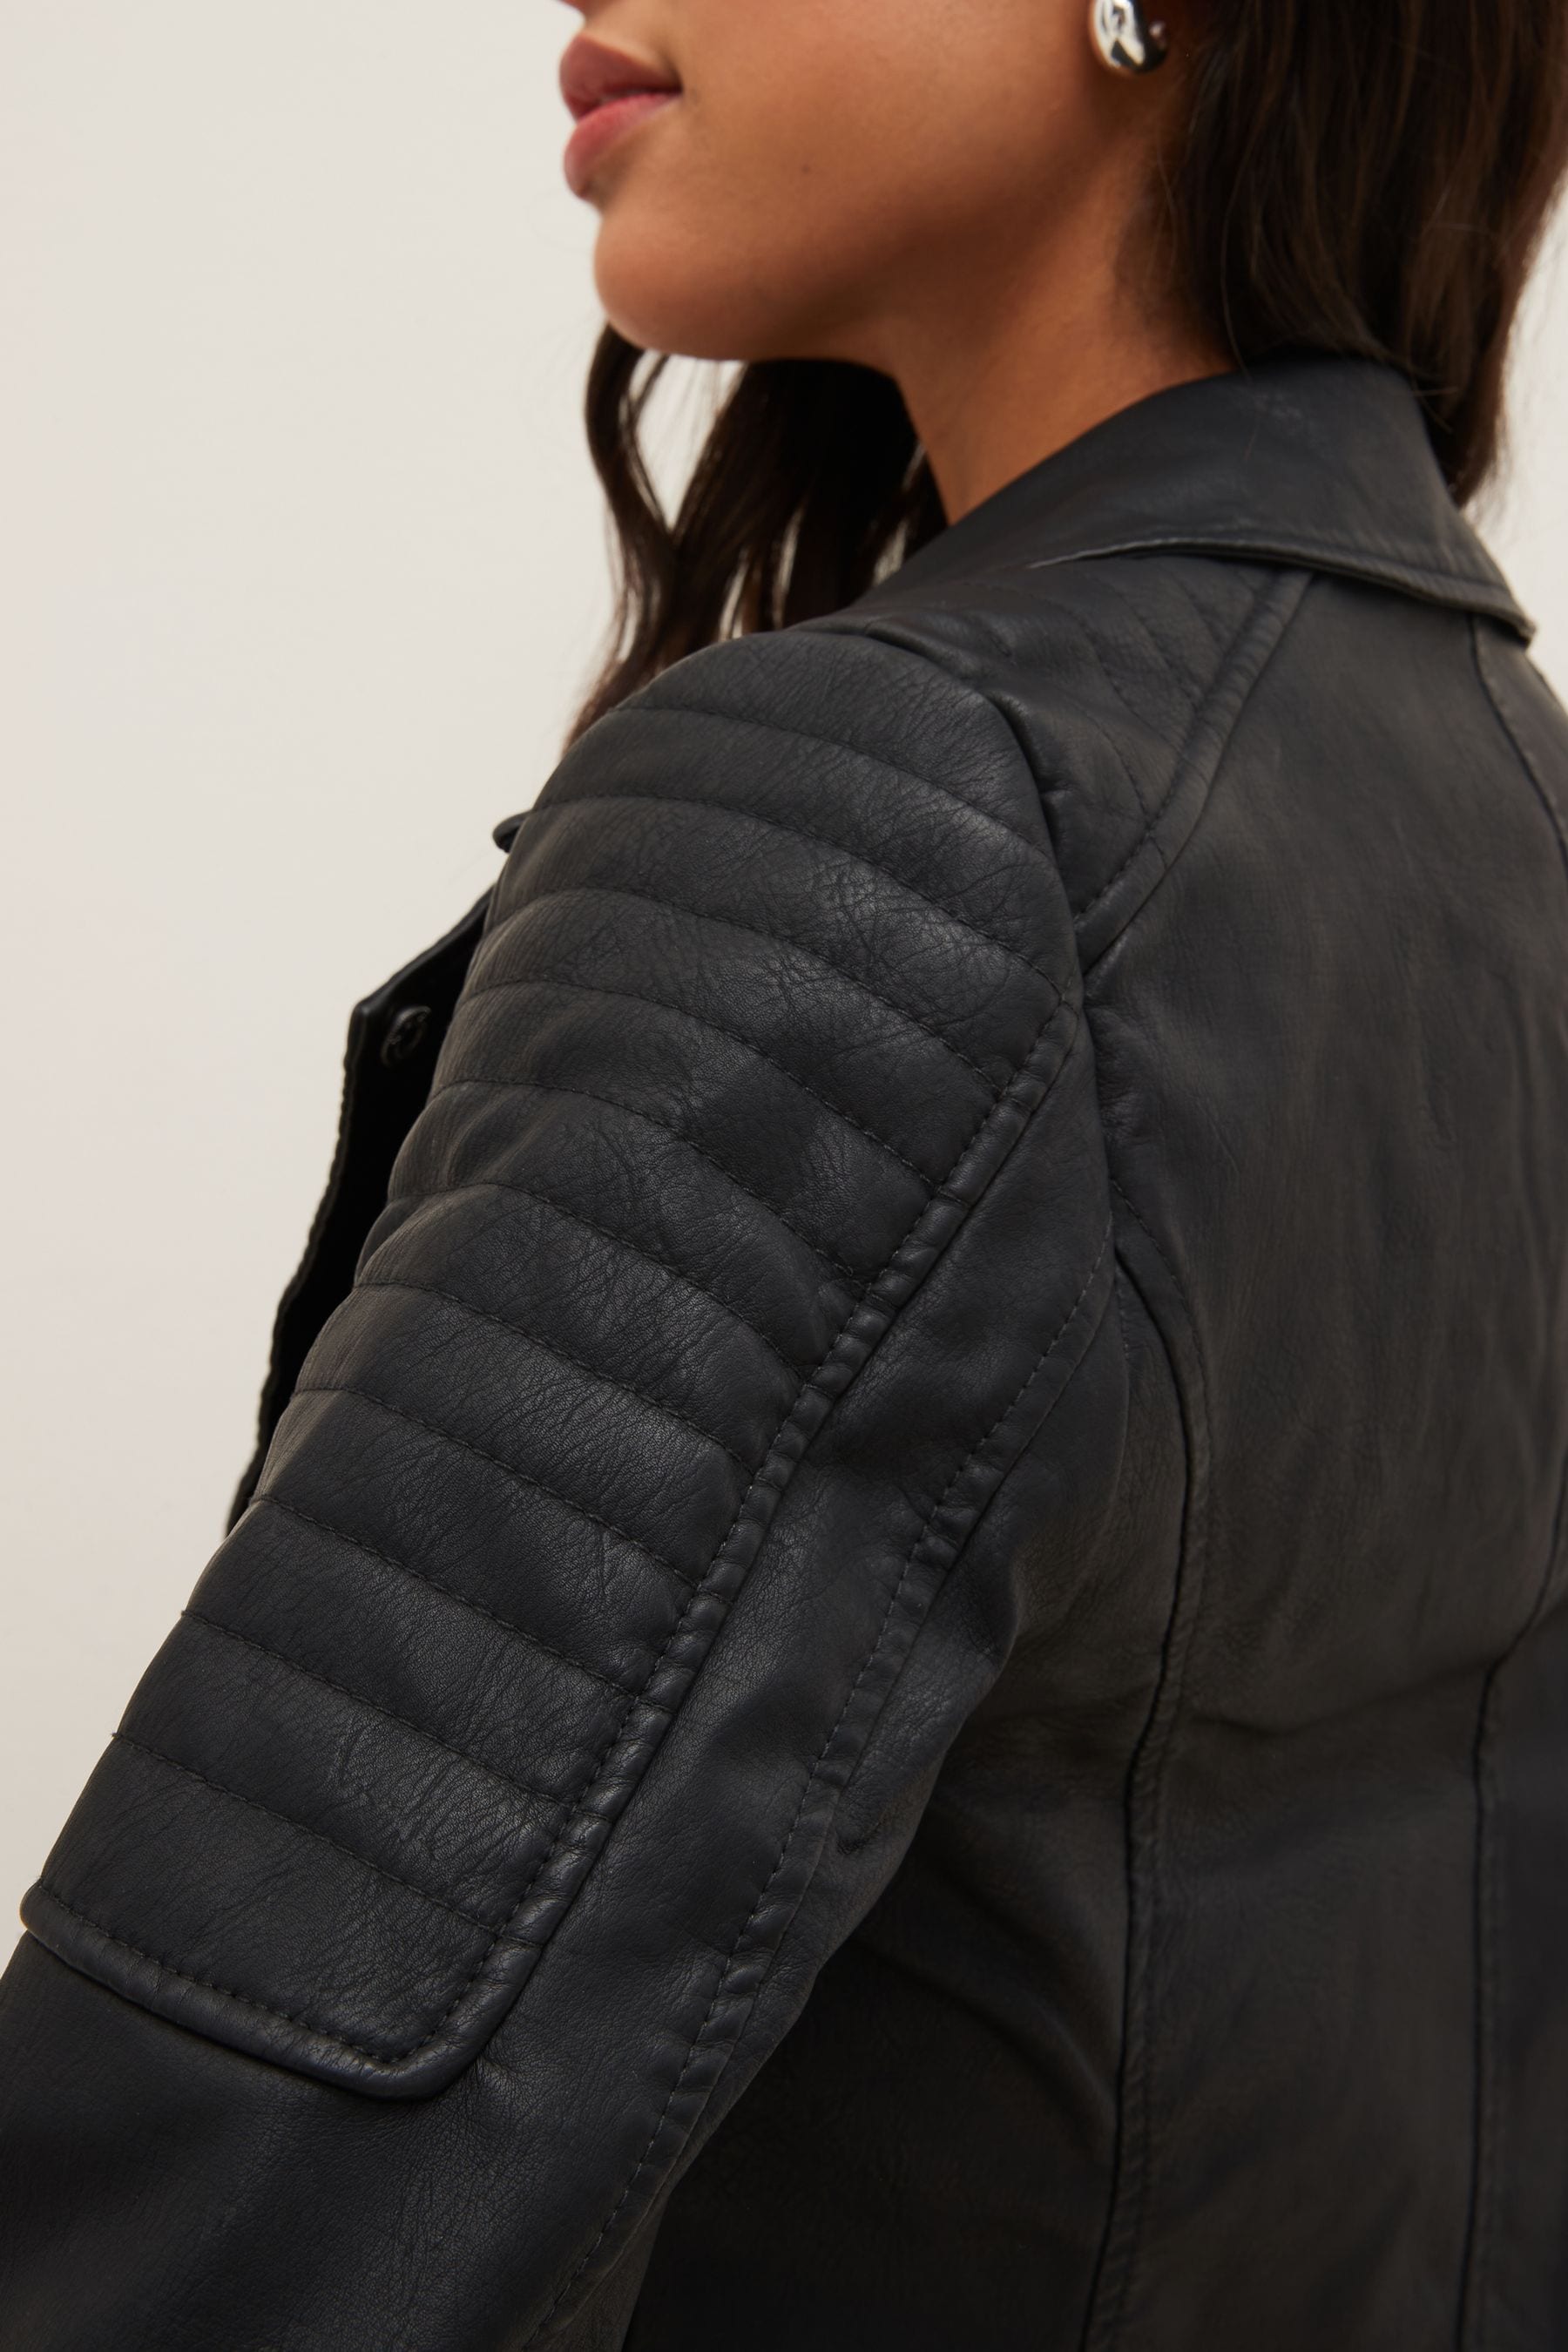 Buy NOISY MAY Black Faux Leather Biker Jacket from the Next UK online shop